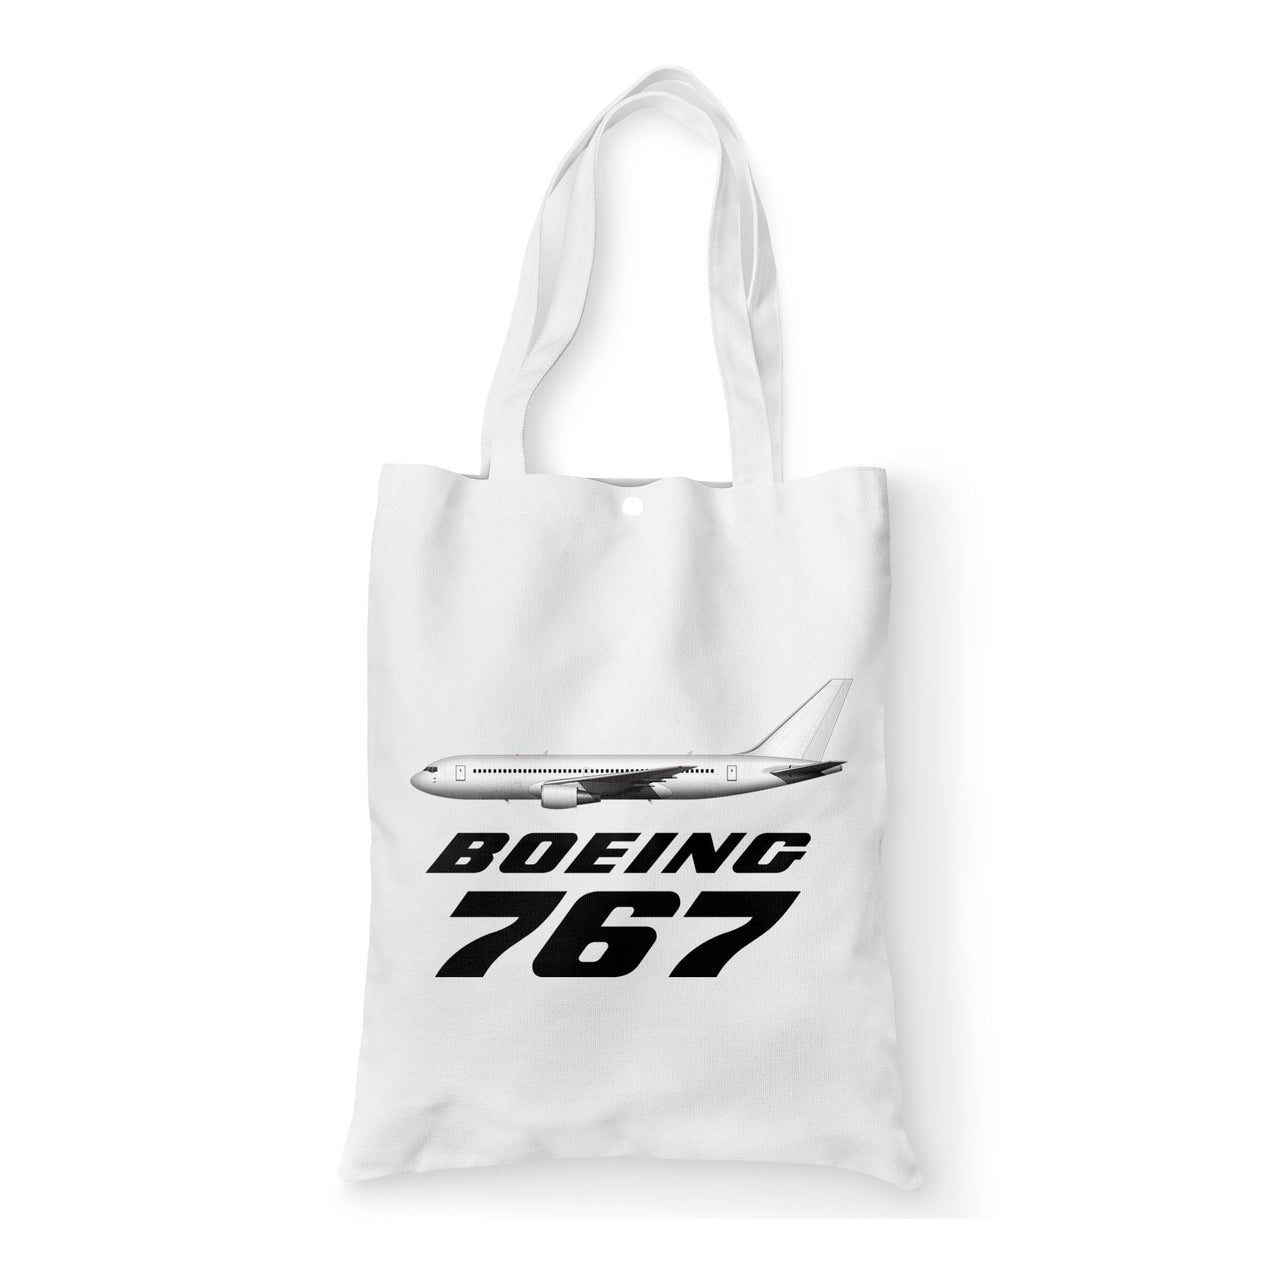 The Boeing 767 Designed Tote Bags